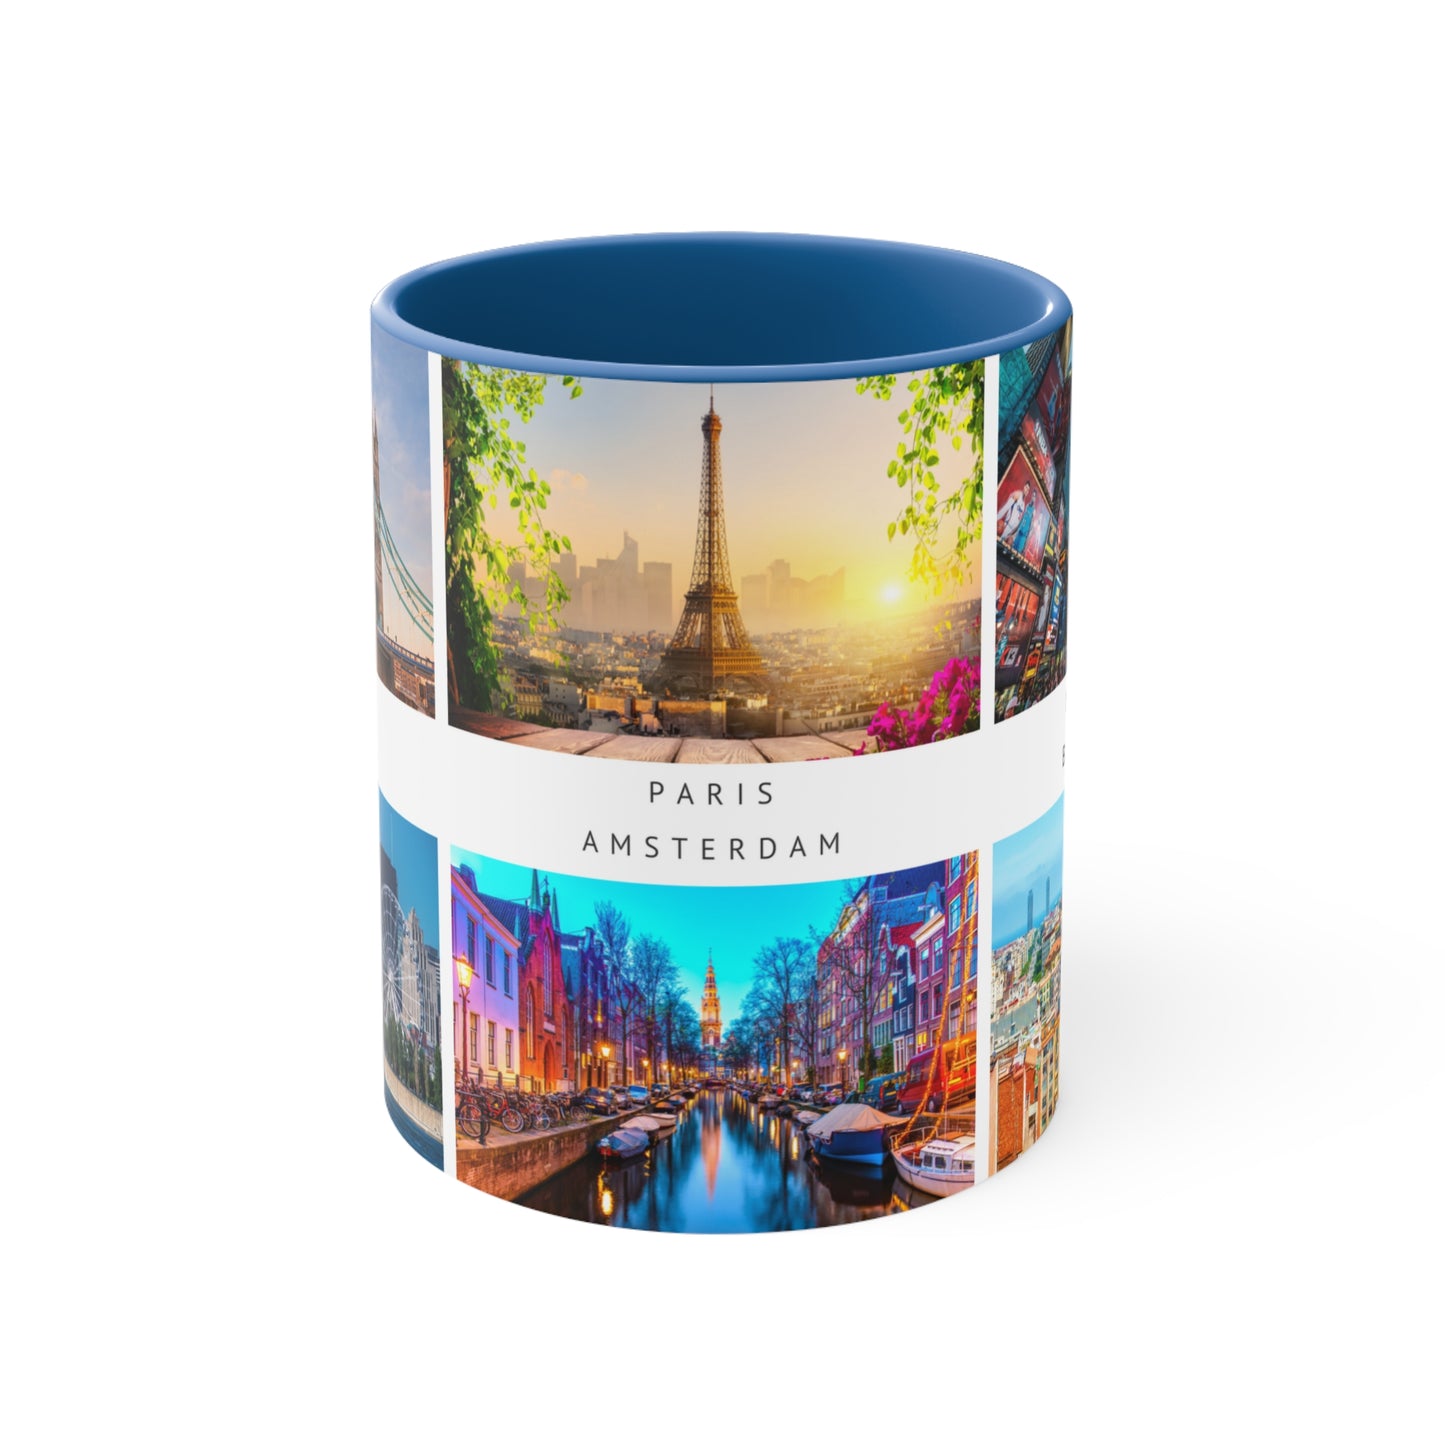 London, Montreal, Paris, Amsterdam, New York and Barcelona! This Travel Accent Coffee Mug is a part of a Travel Series for you to choose from. 11oz. Great as a gift or get one to enjoy yourself.